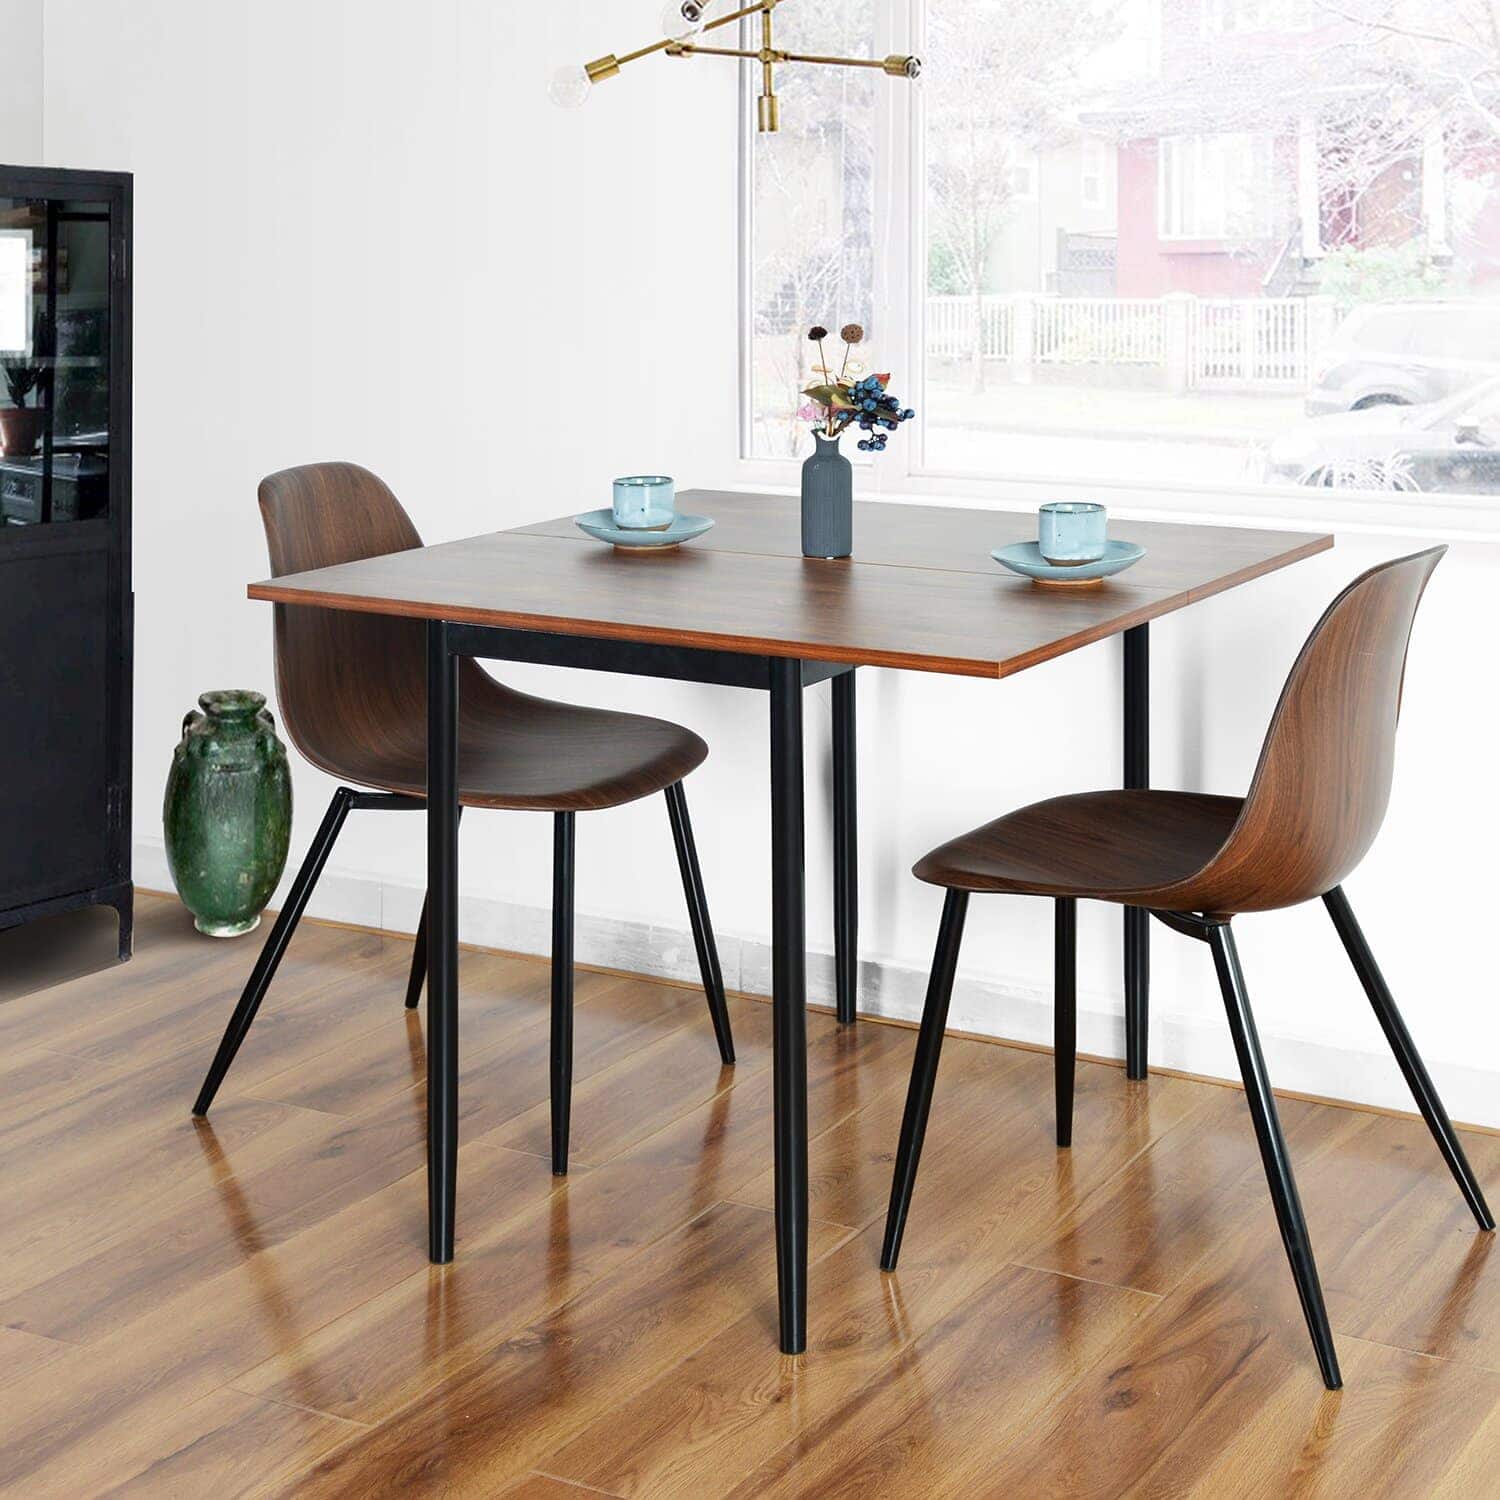 20 Dining Tables Ideas For Small Spaces, Folding Dining Room Table